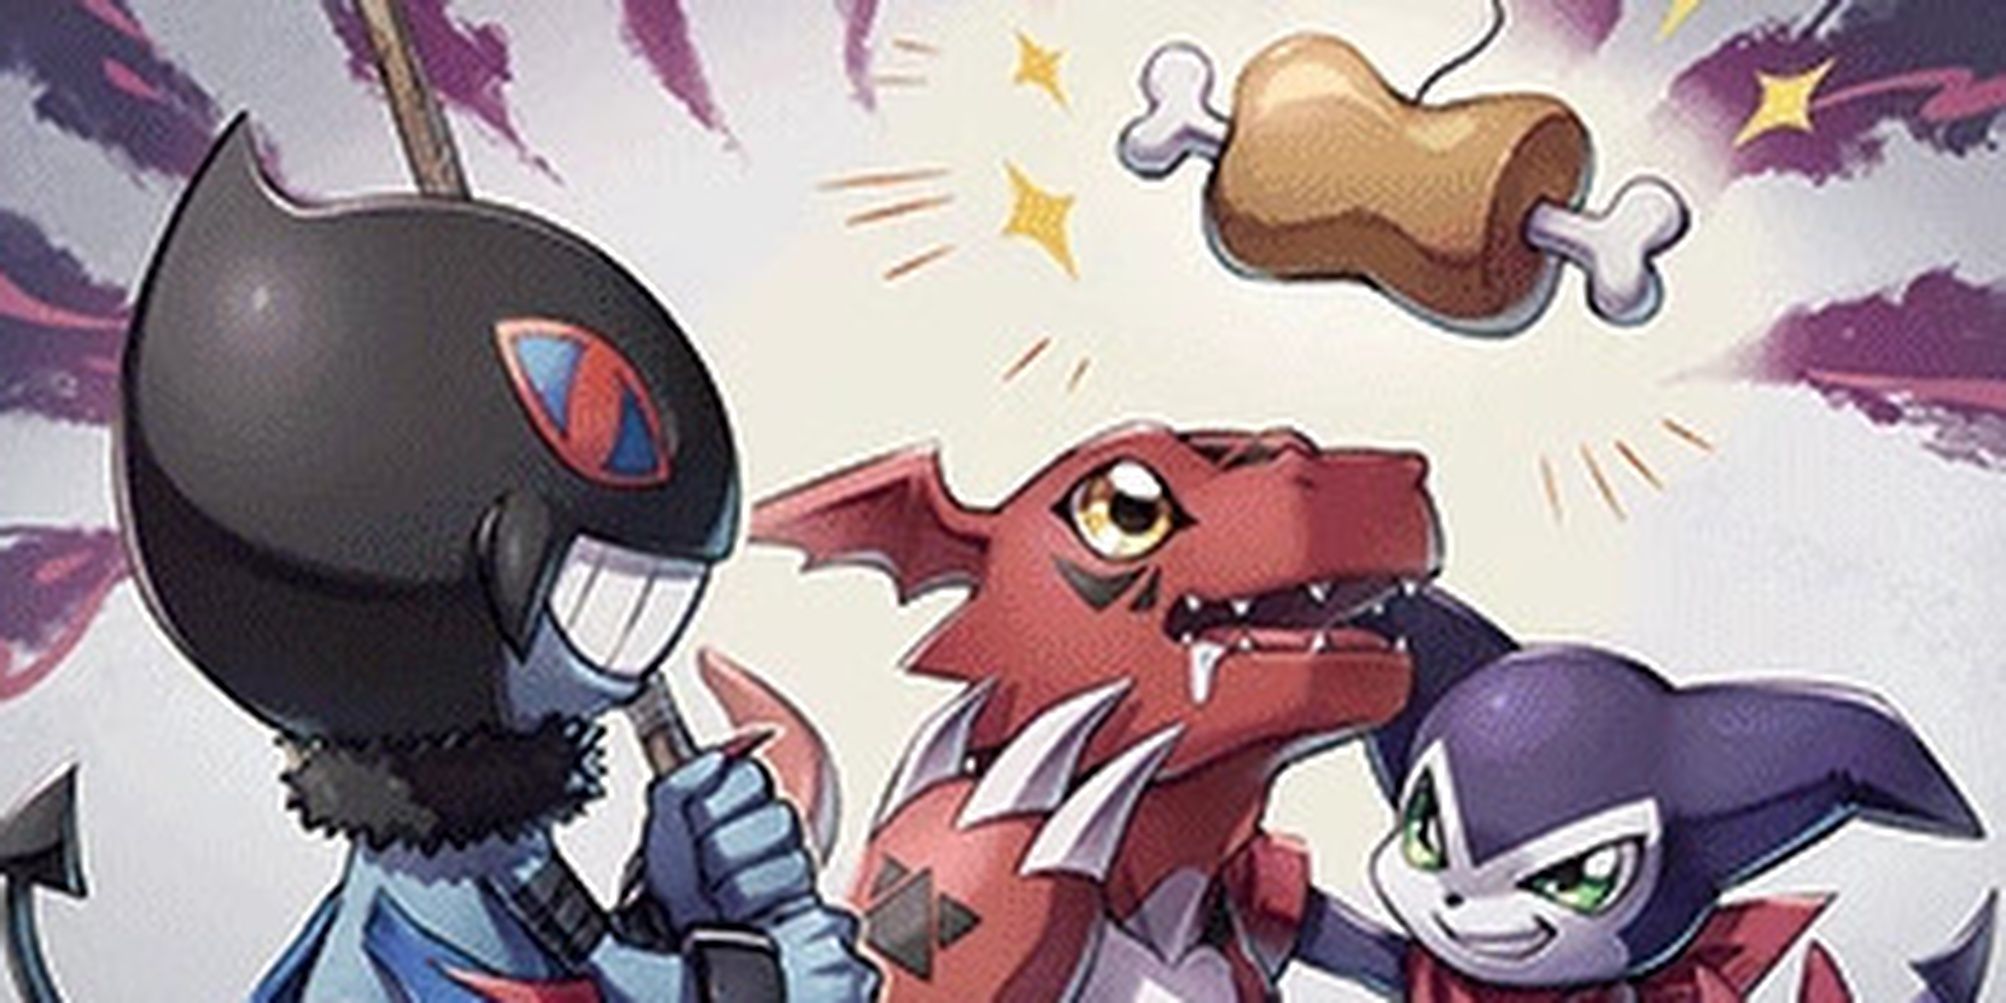 cropped art calling from the darkness from digimon tcg with dracmon guilmon and impmon